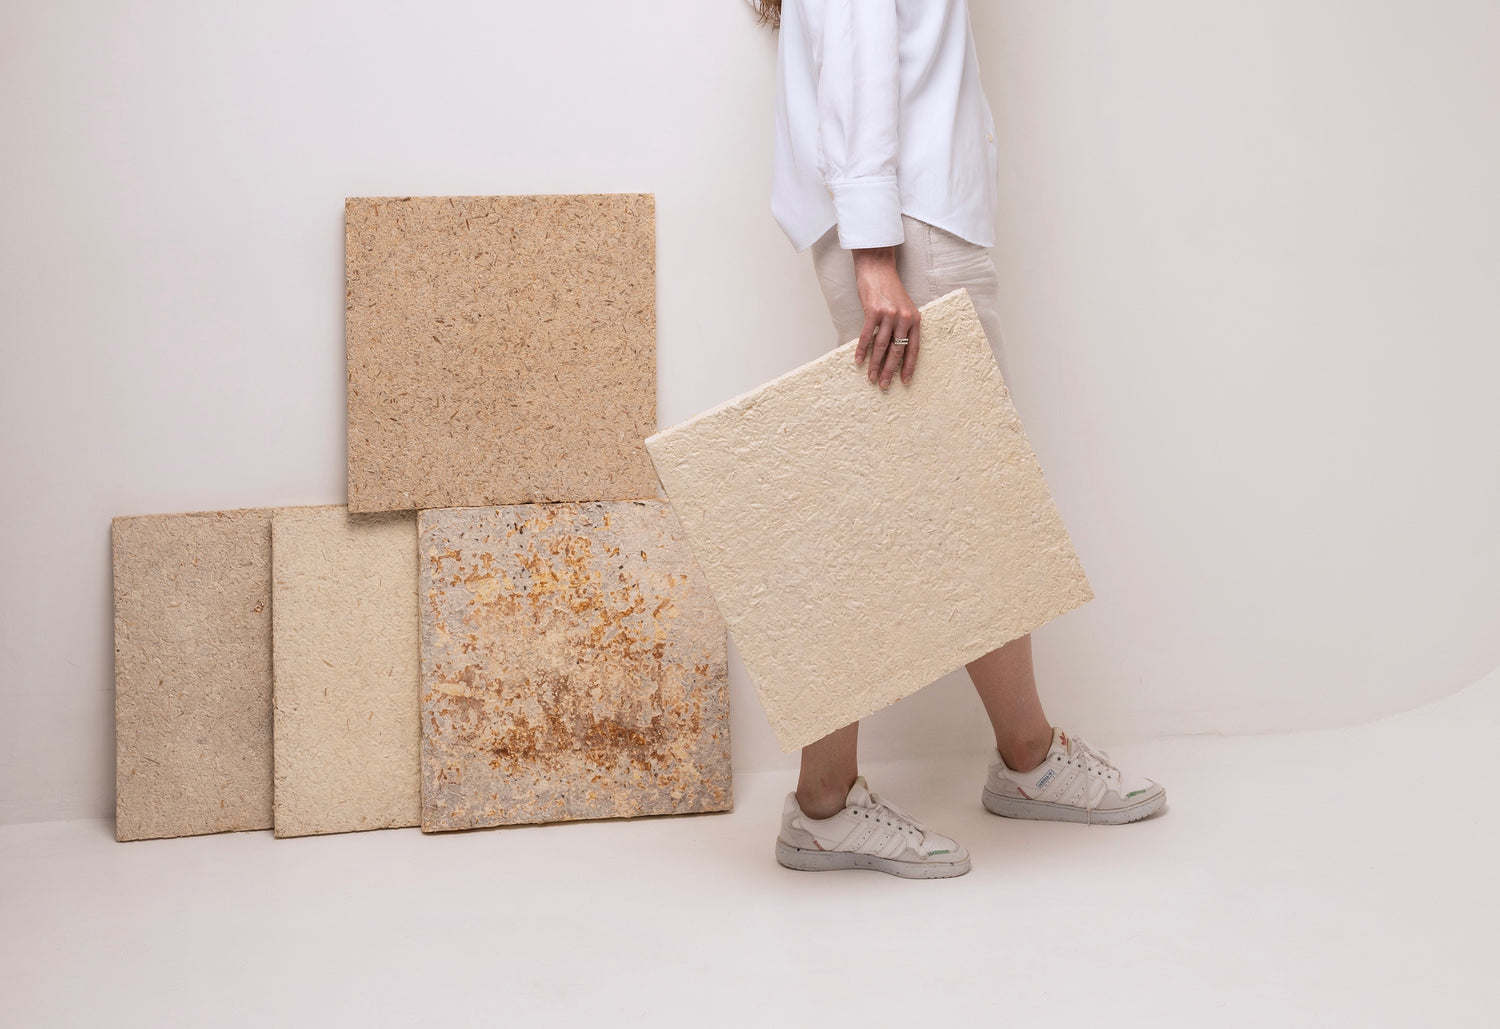 Fumo are mycelium wall covering panels designed by Malina Tezycka. Fumo are bio-based and eco-friendly aclustic wall panels. 